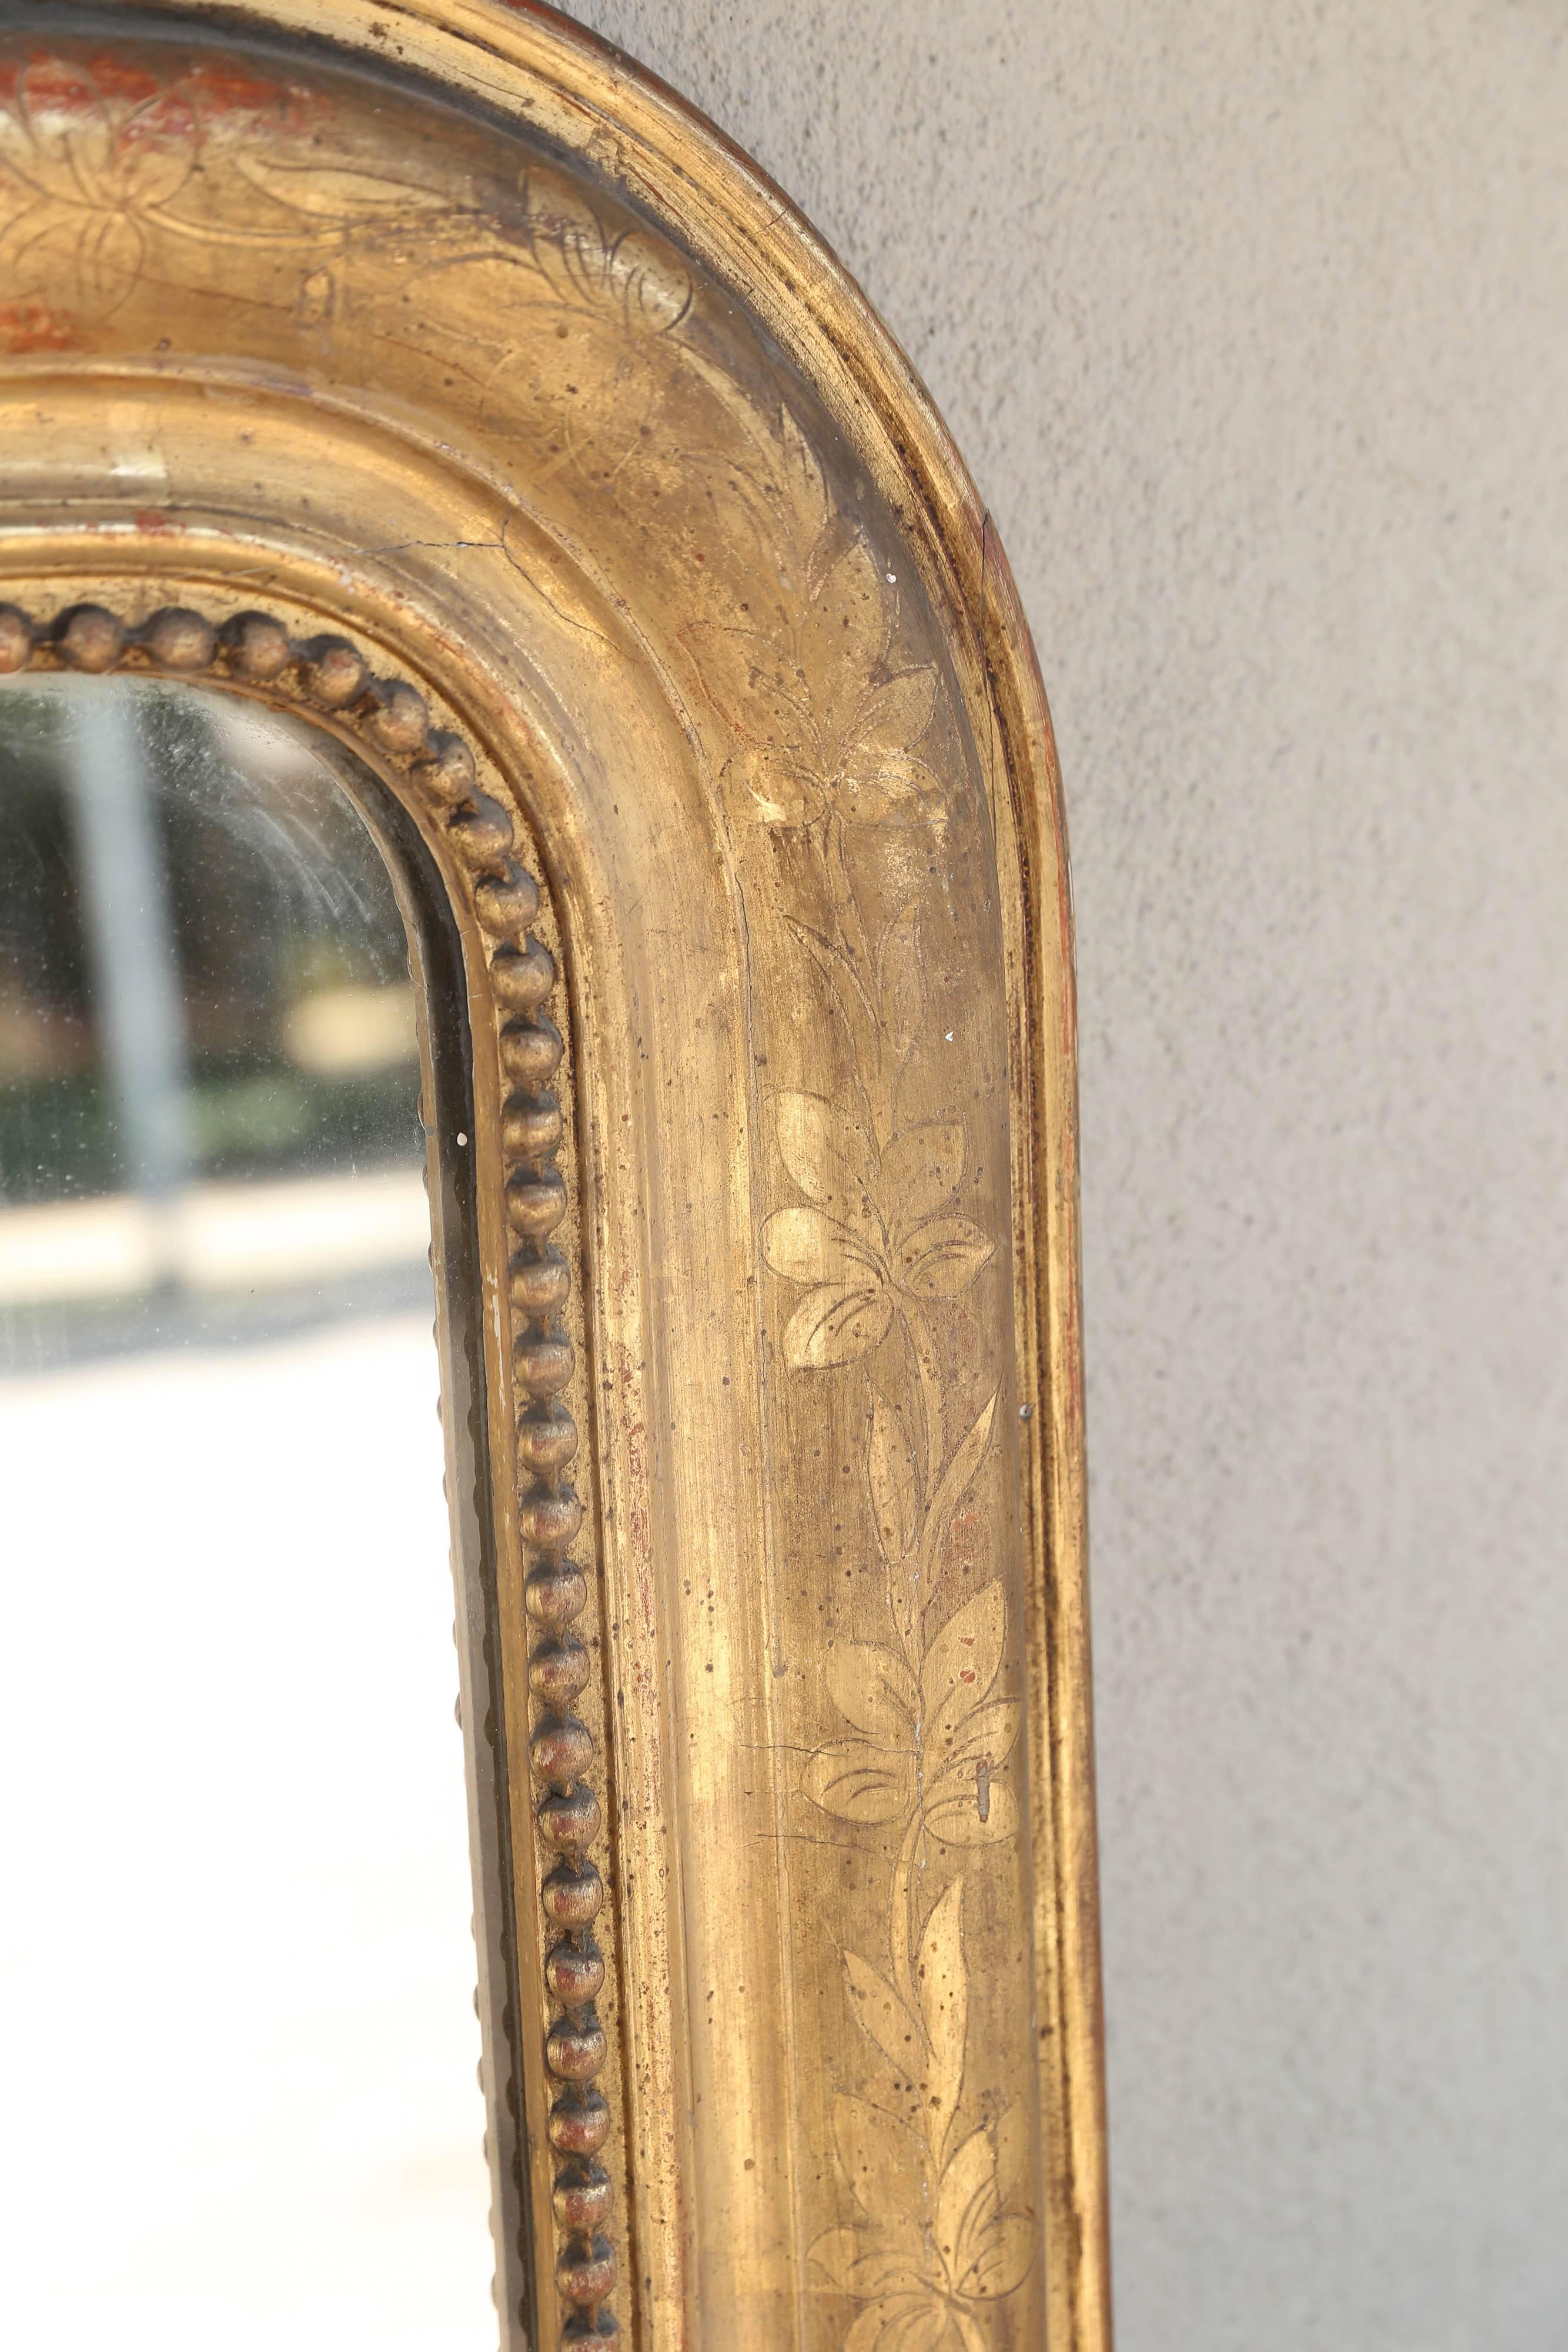 This is an antique Louis Philippe Mirror, discovered in France. The design on the giltwood frame is a floral pattern with decorative beaded accents. The tones are in the range of soft reds that have likely faded over time, leaving a beautiful